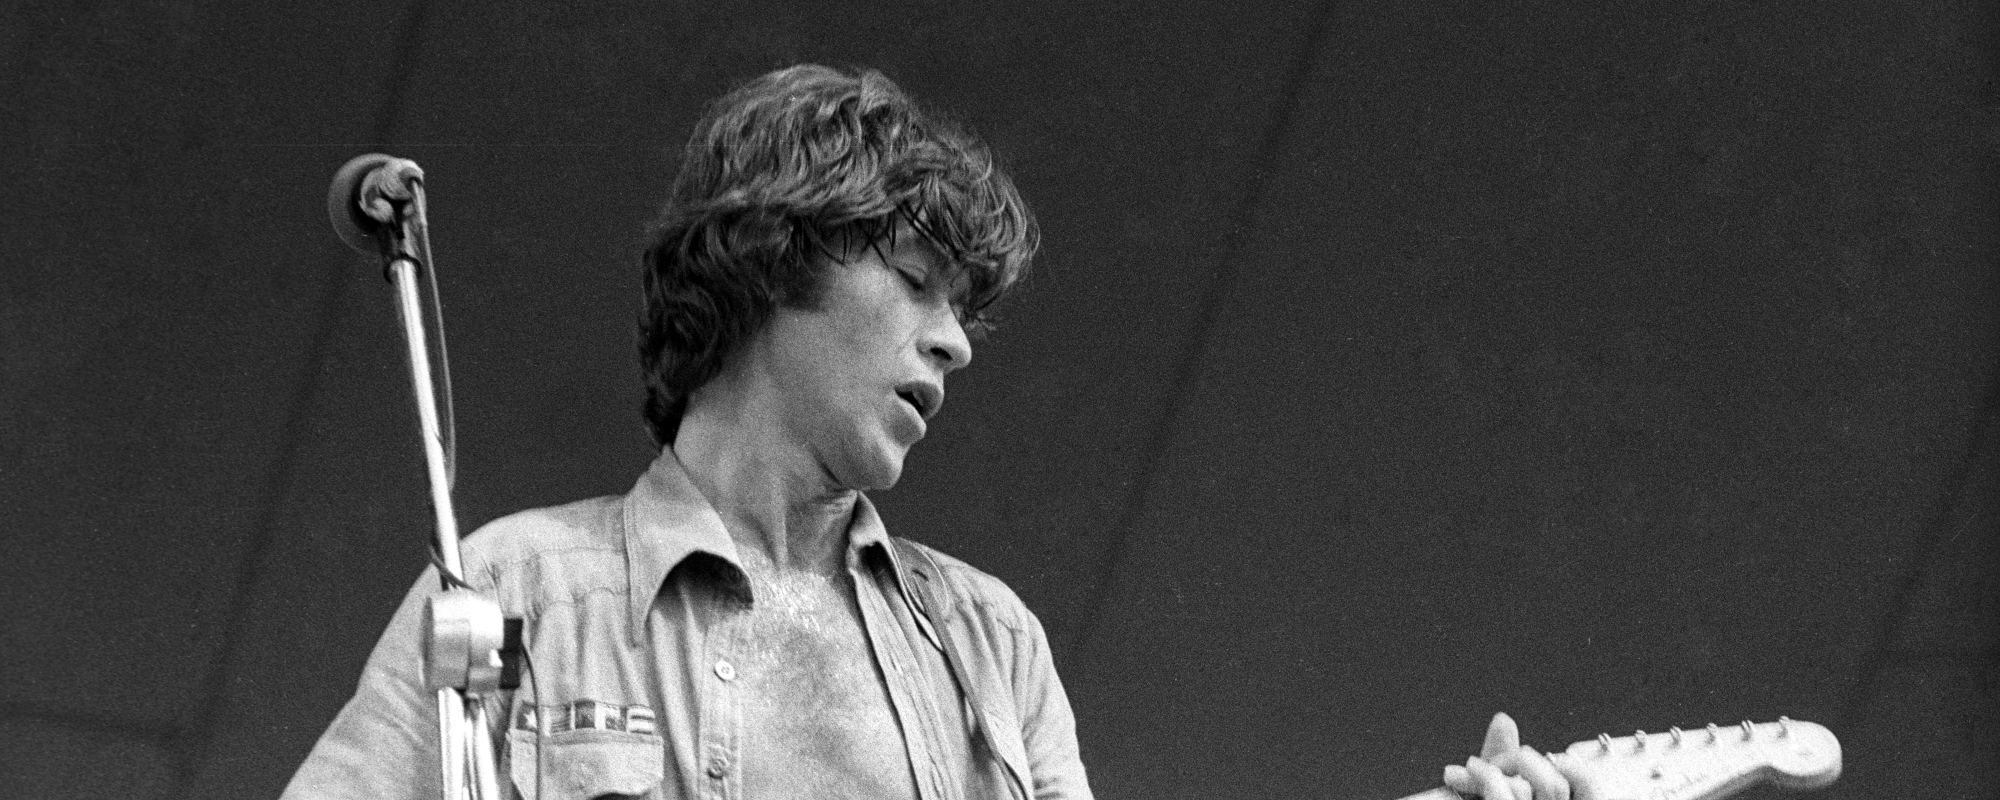 Joni Mitchell, Neil Diamond and More Remember The Band’s Robbie Robertson